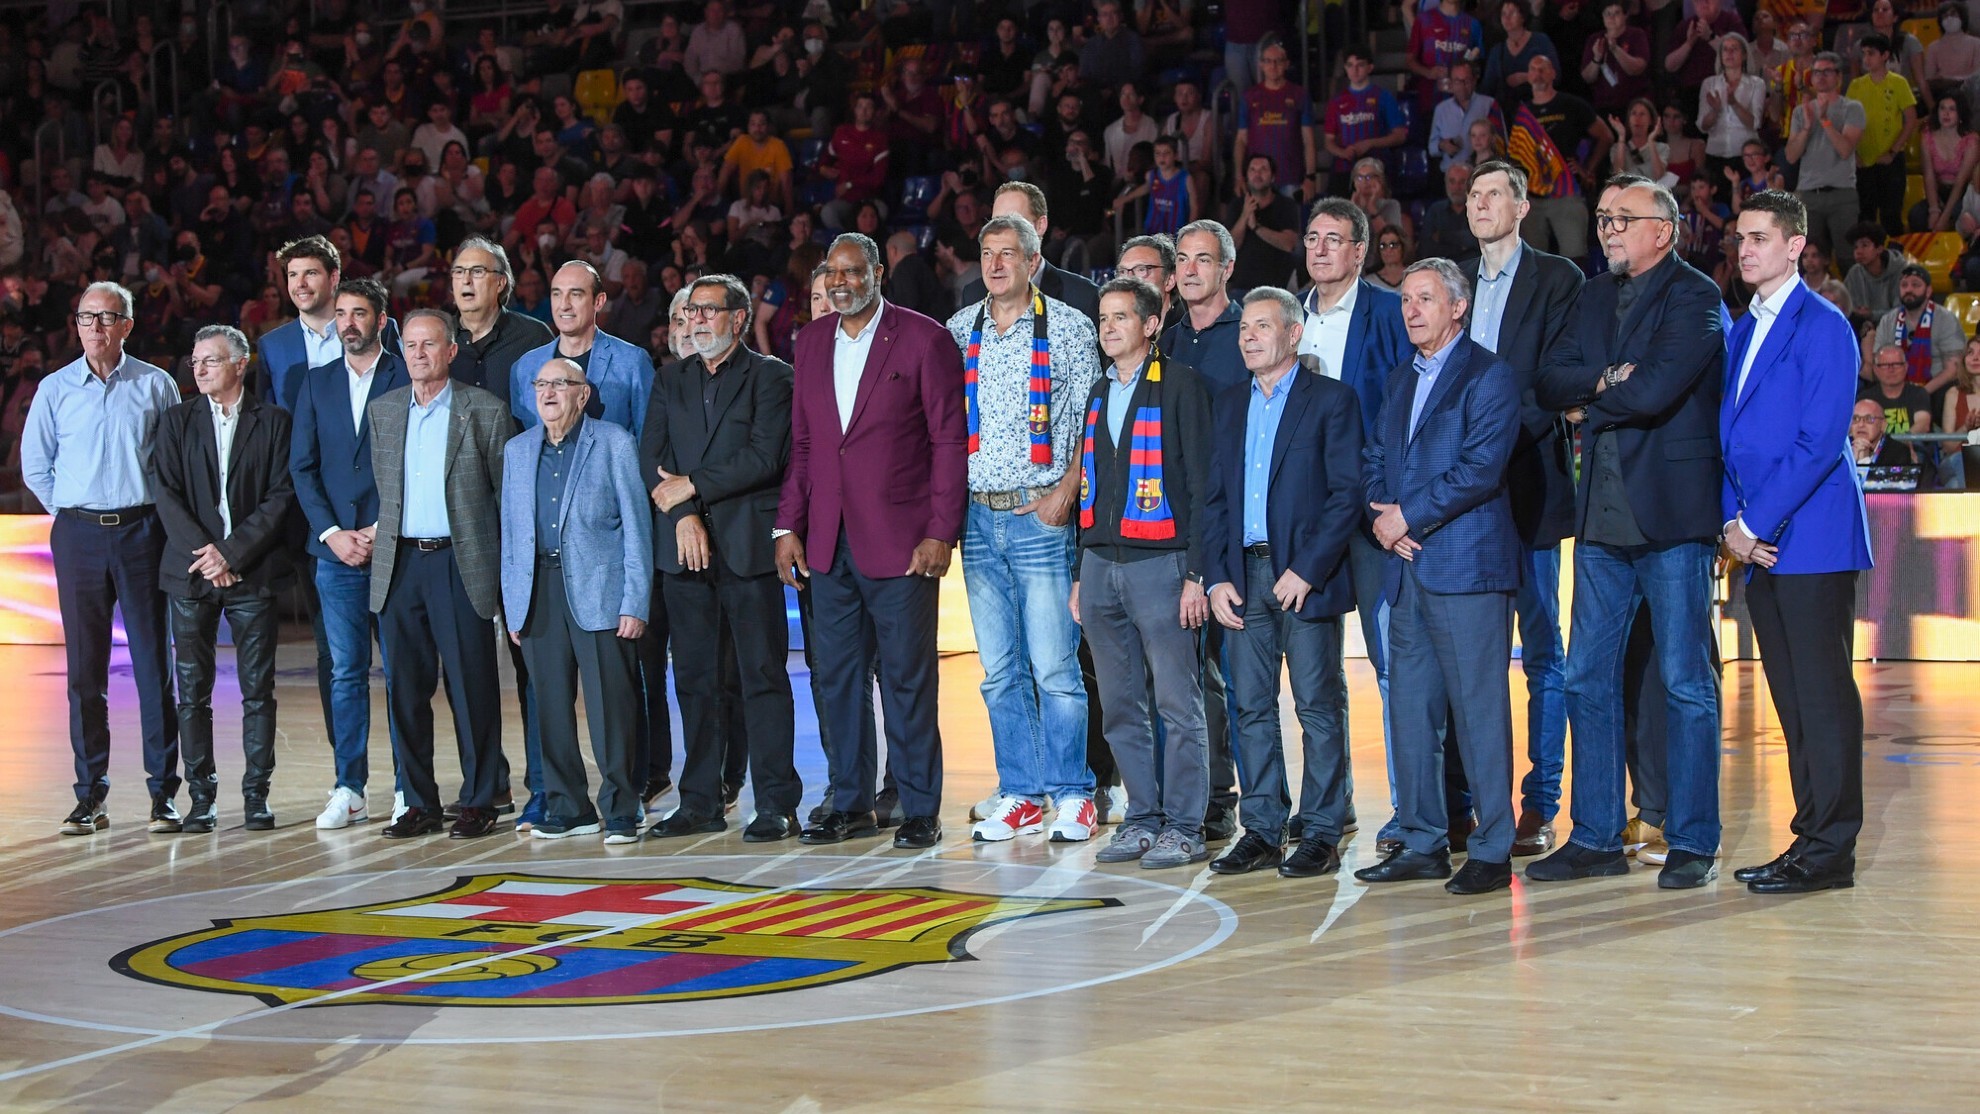 A large part of Barça's history can be summed up with the legends who posed at the Palau.